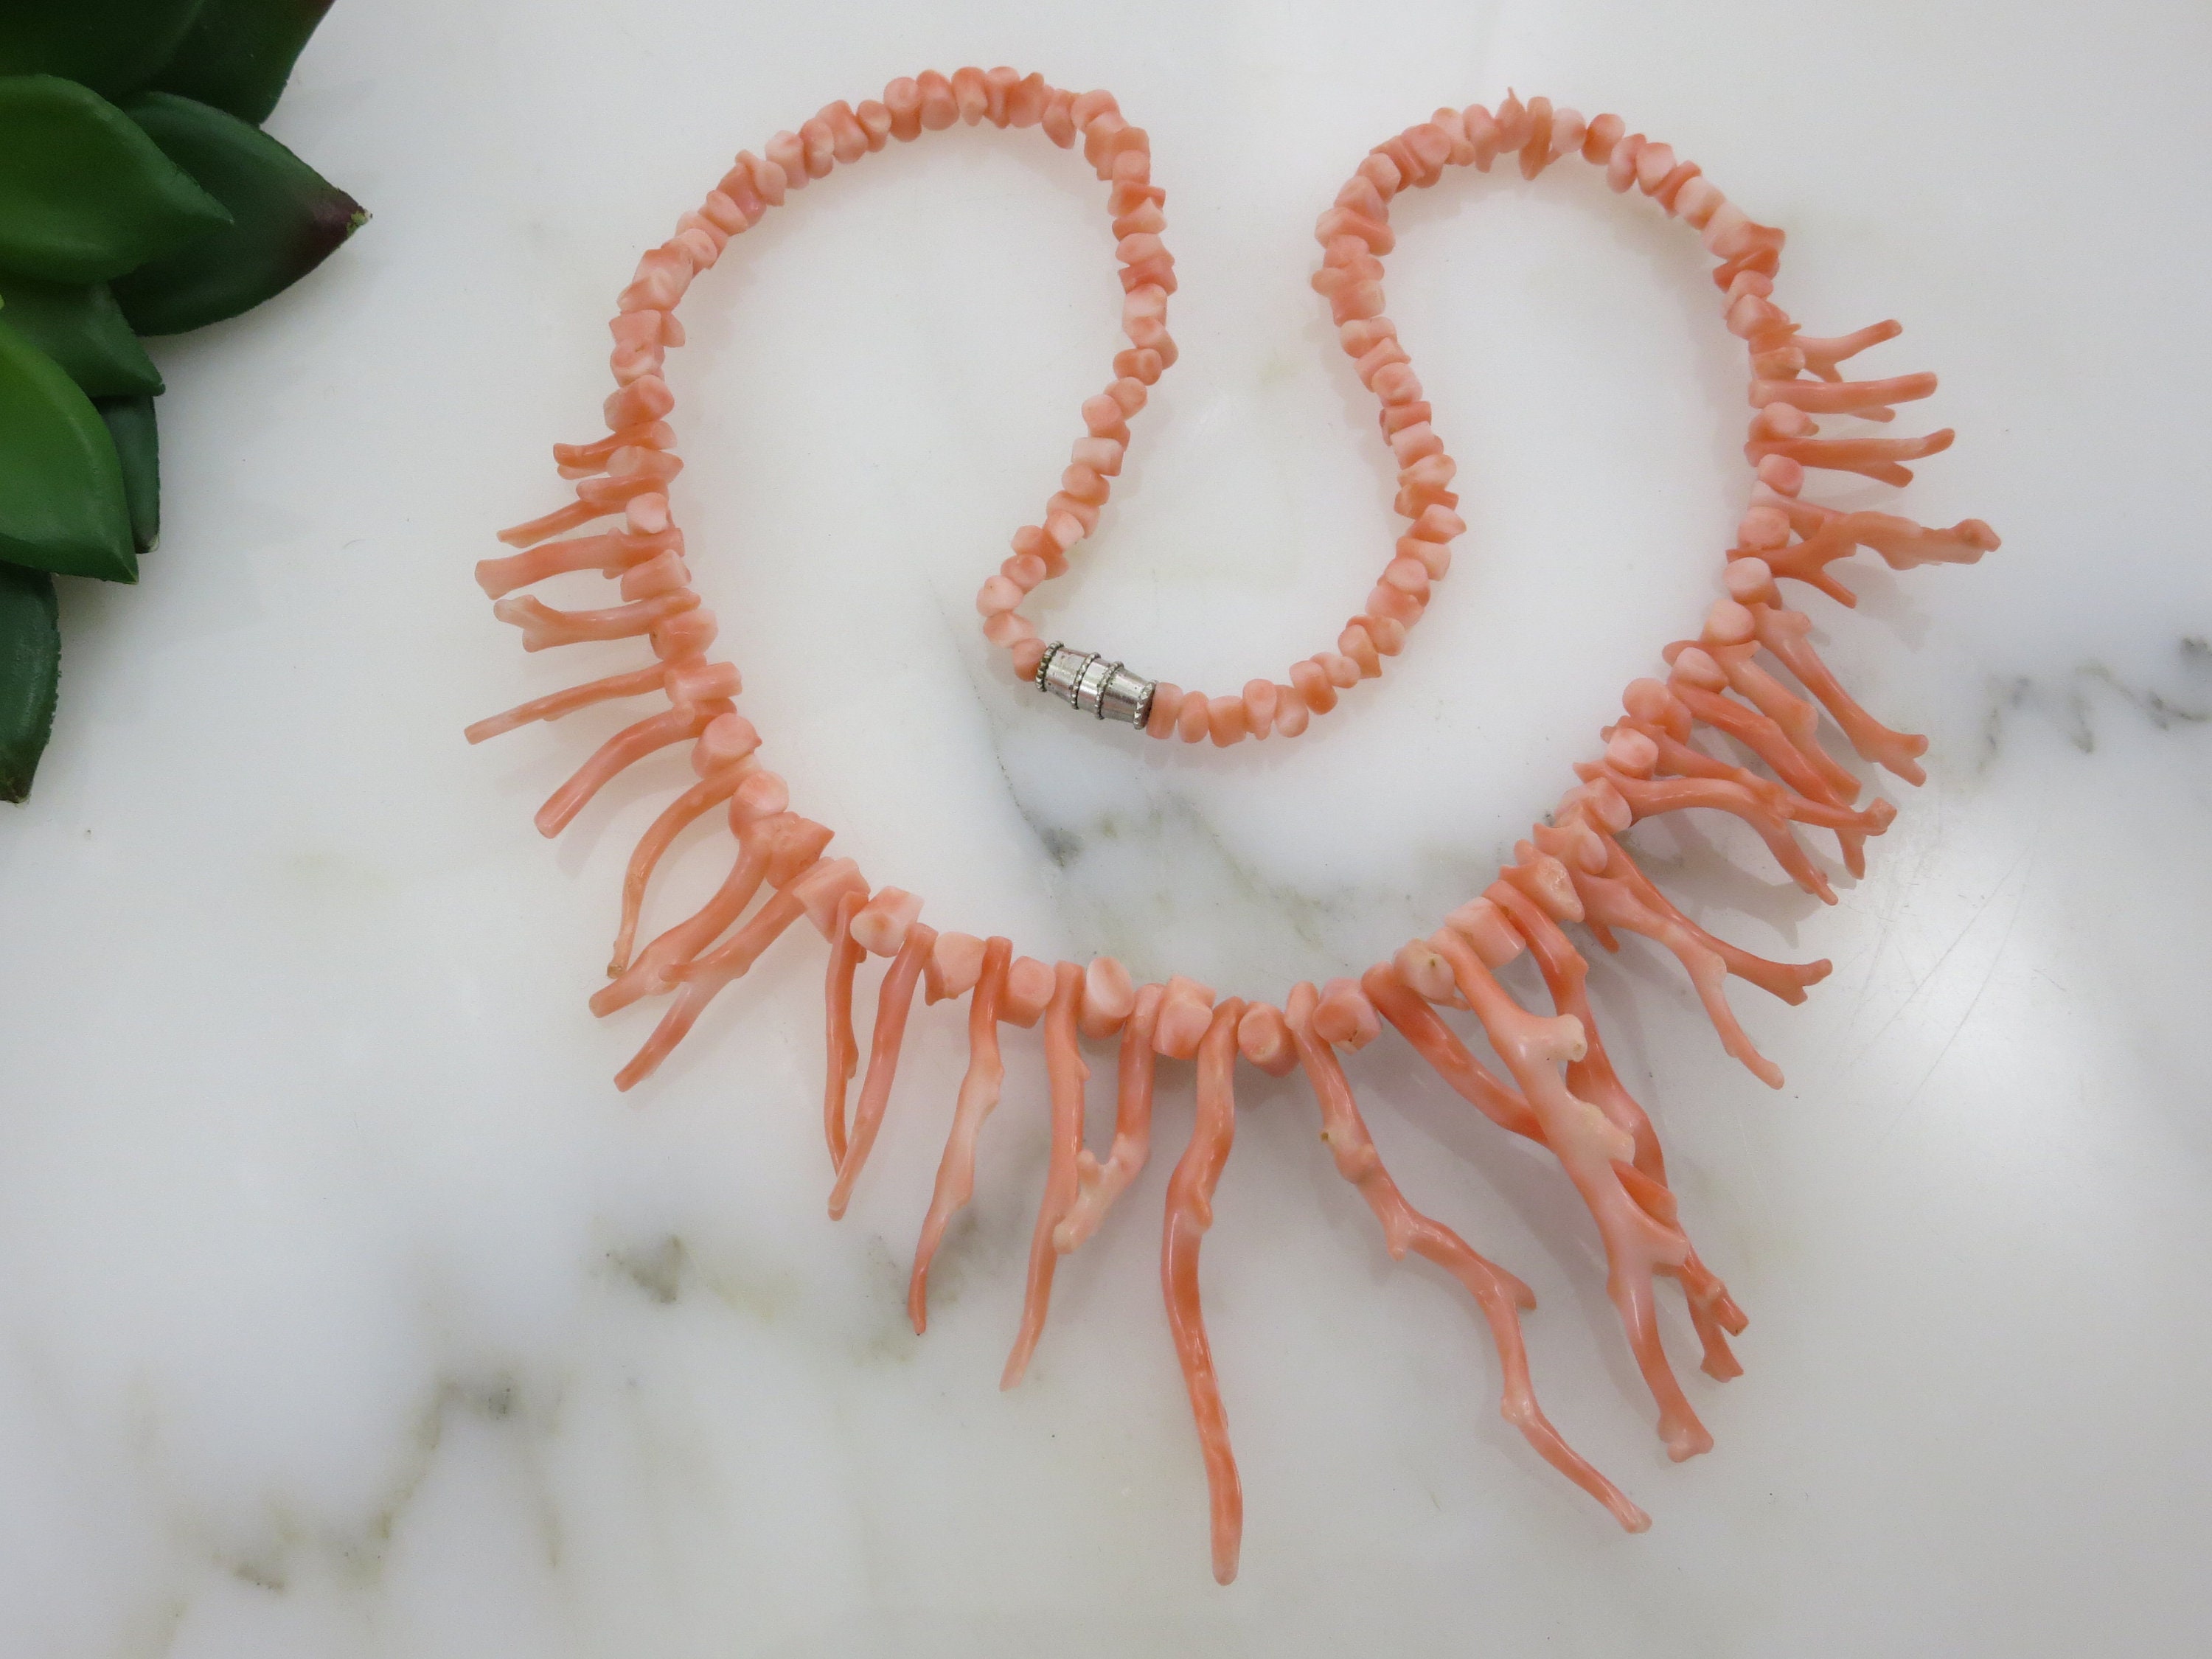 Fabulous Vintage Faux Coral Bead Bib Necklace - The Jewelry Stylist